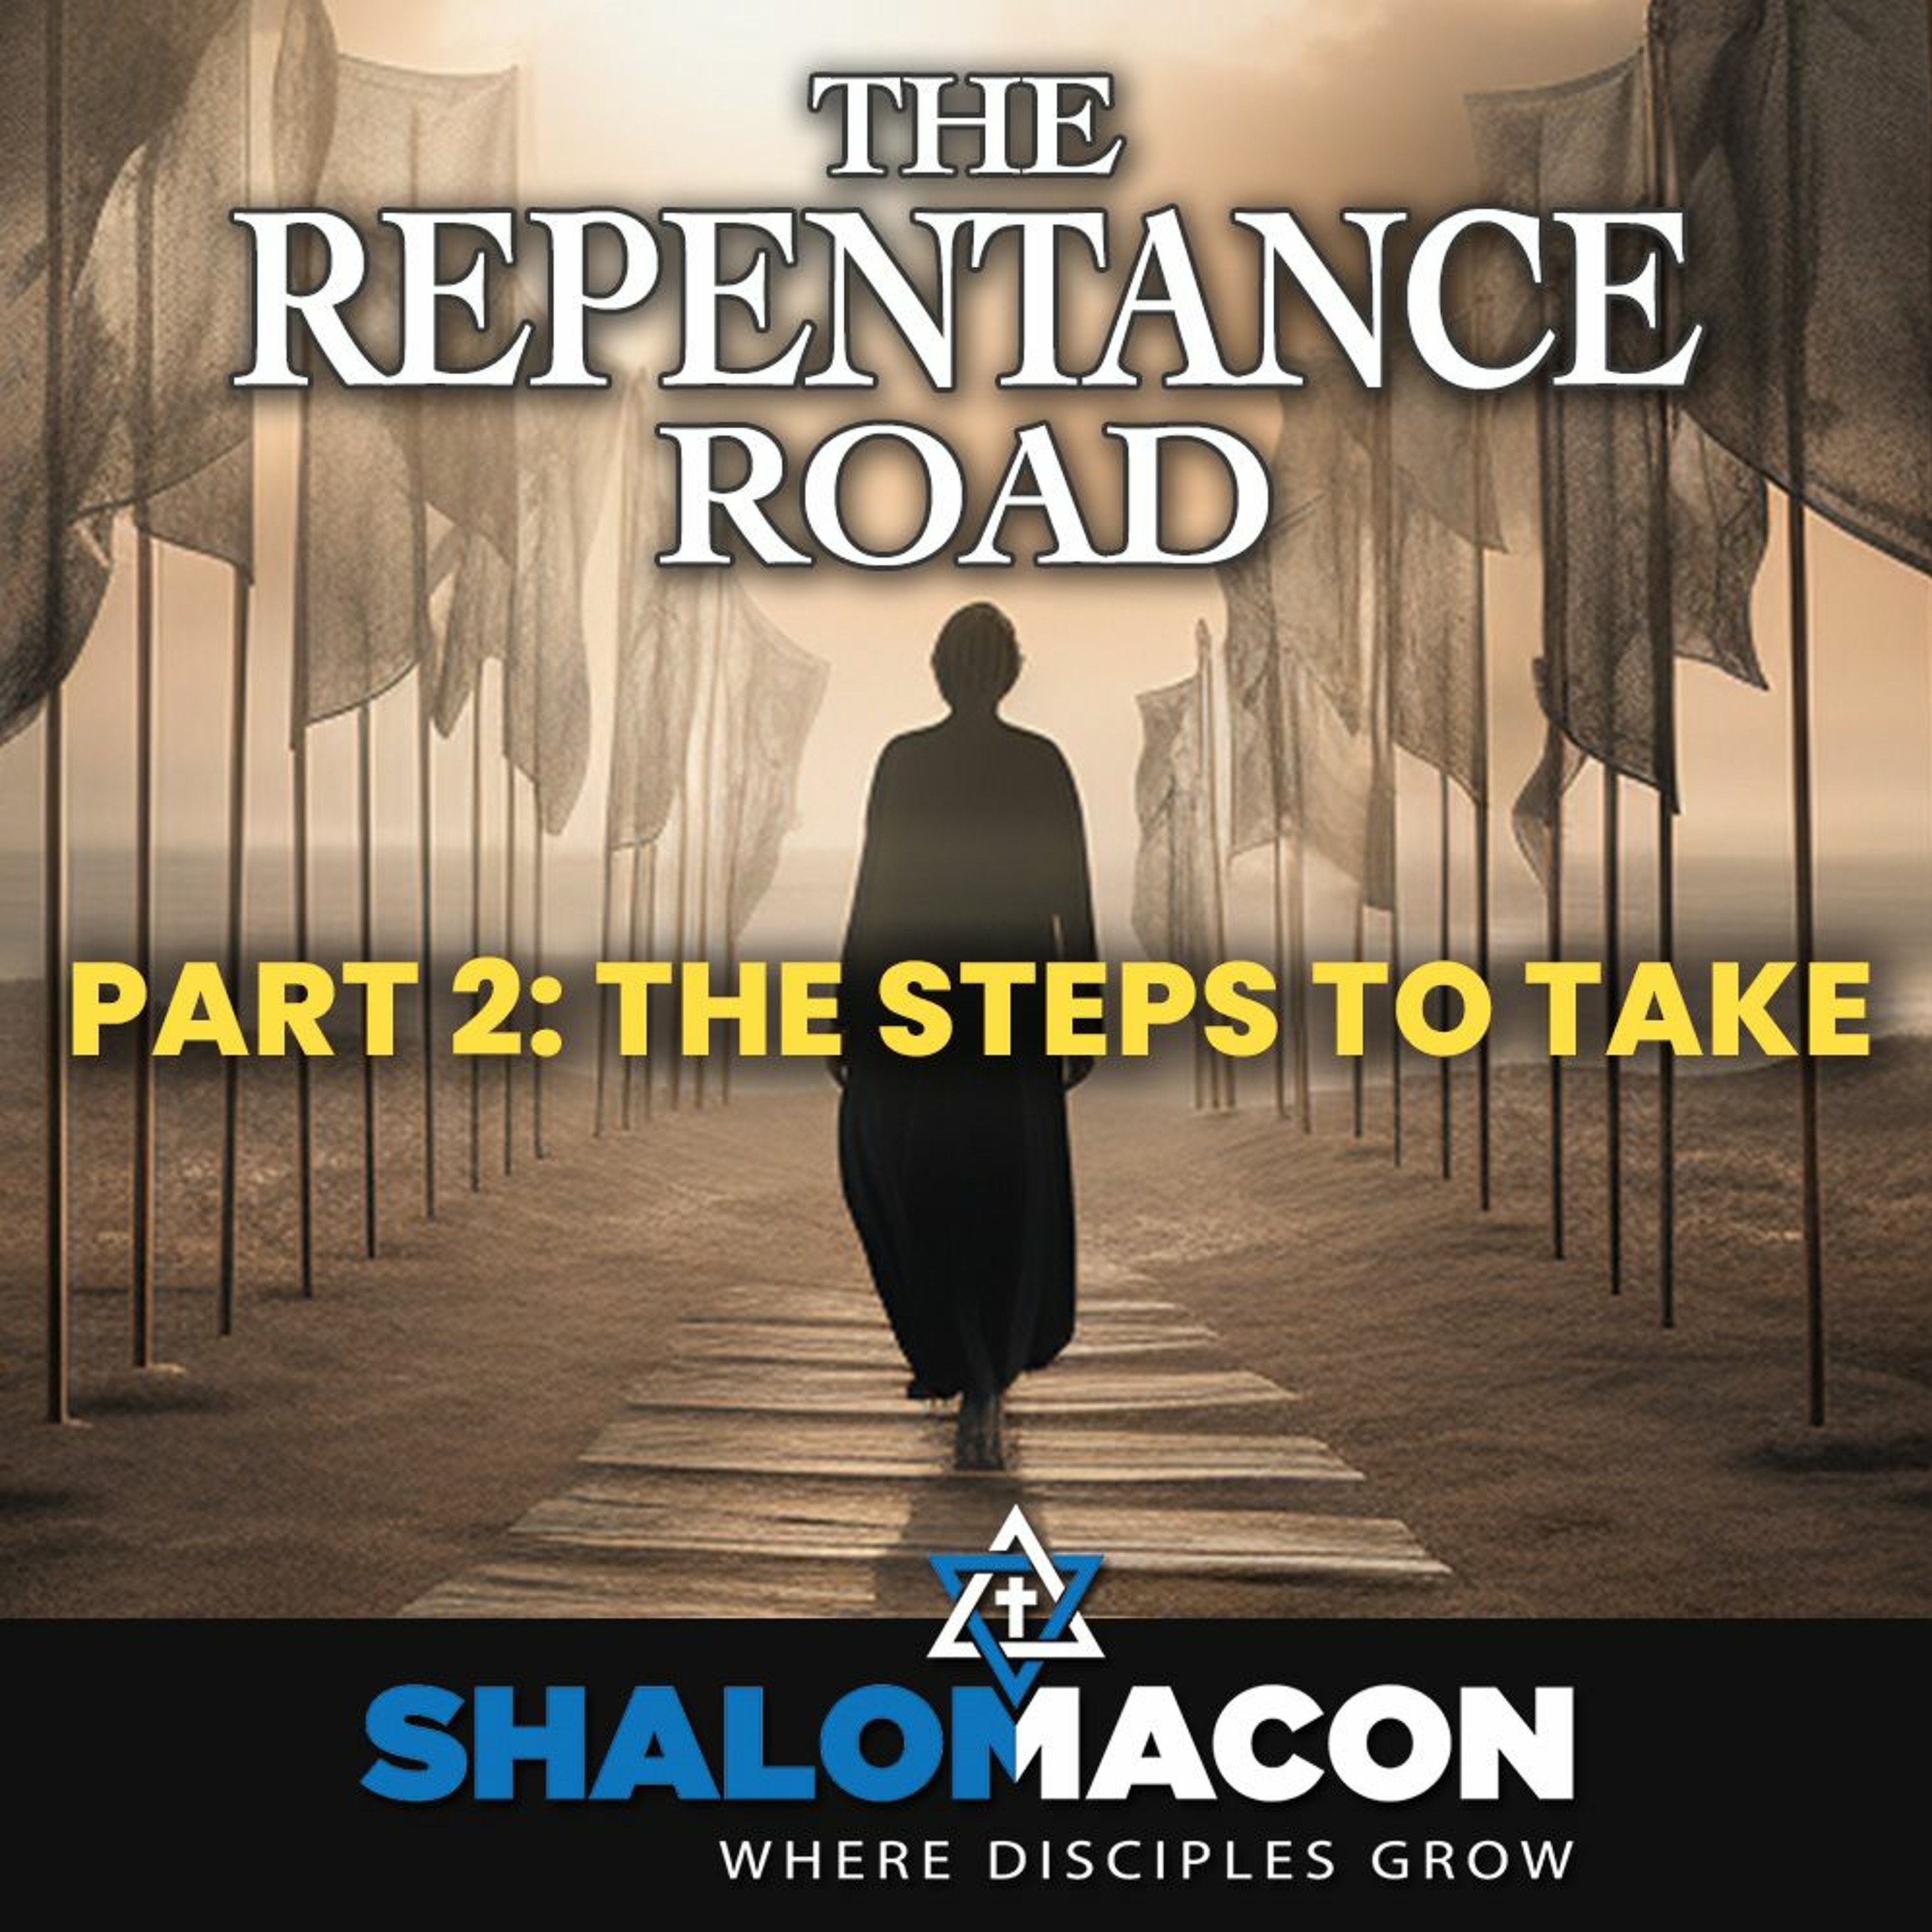 The Repentance Road, Part 2: The Steps To Take